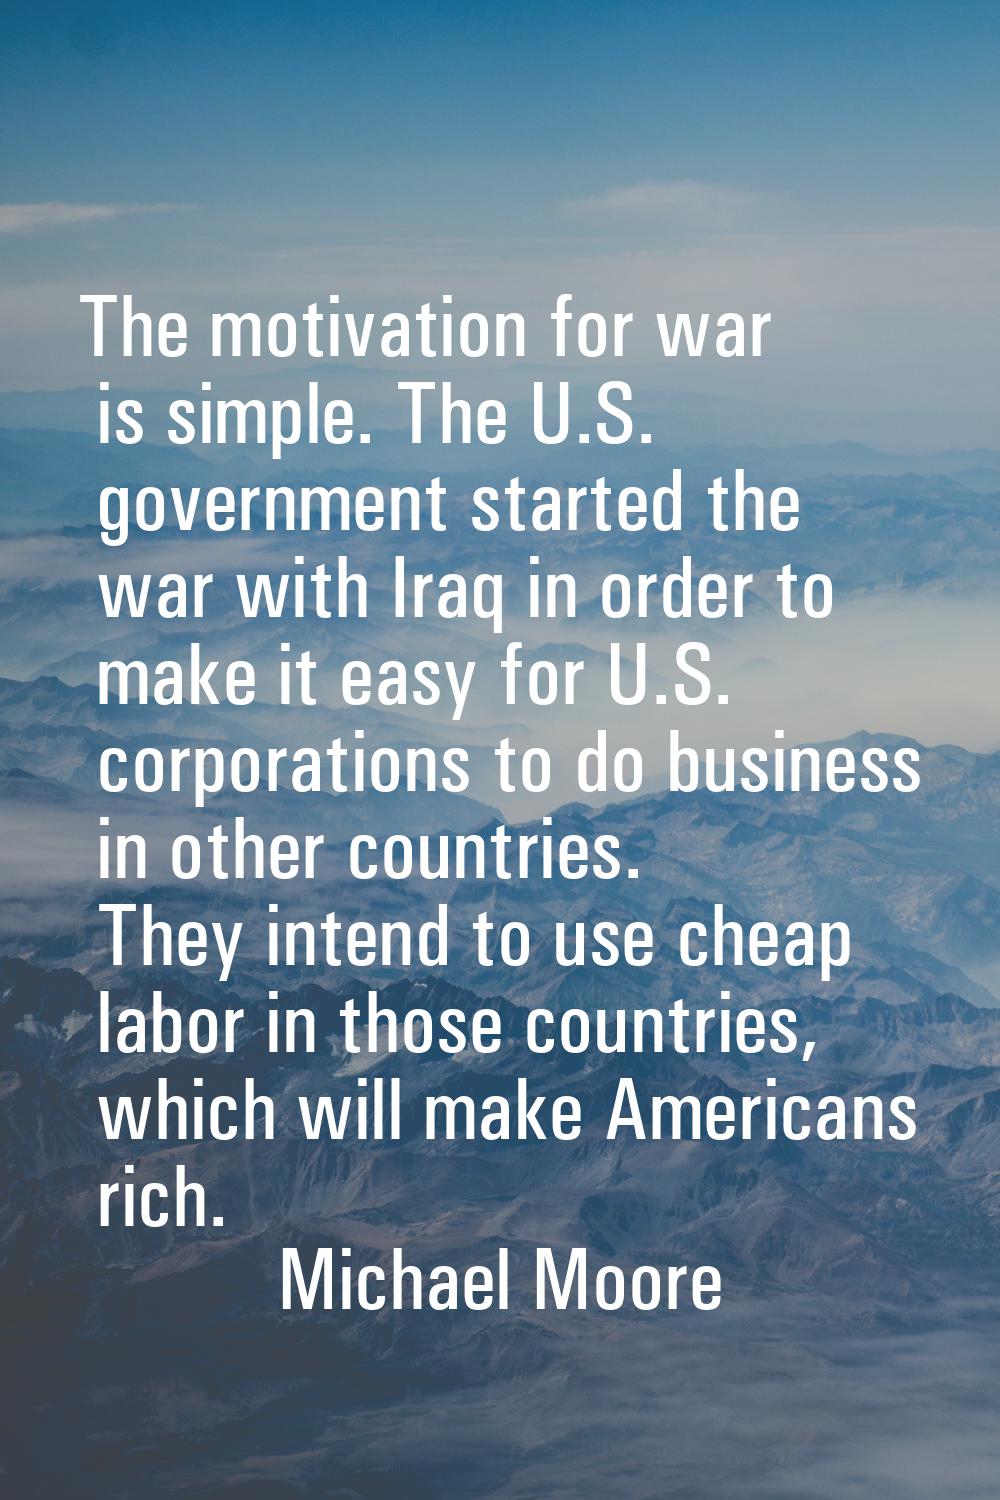 The motivation for war is simple. The U.S. government started the war with Iraq in order to make it